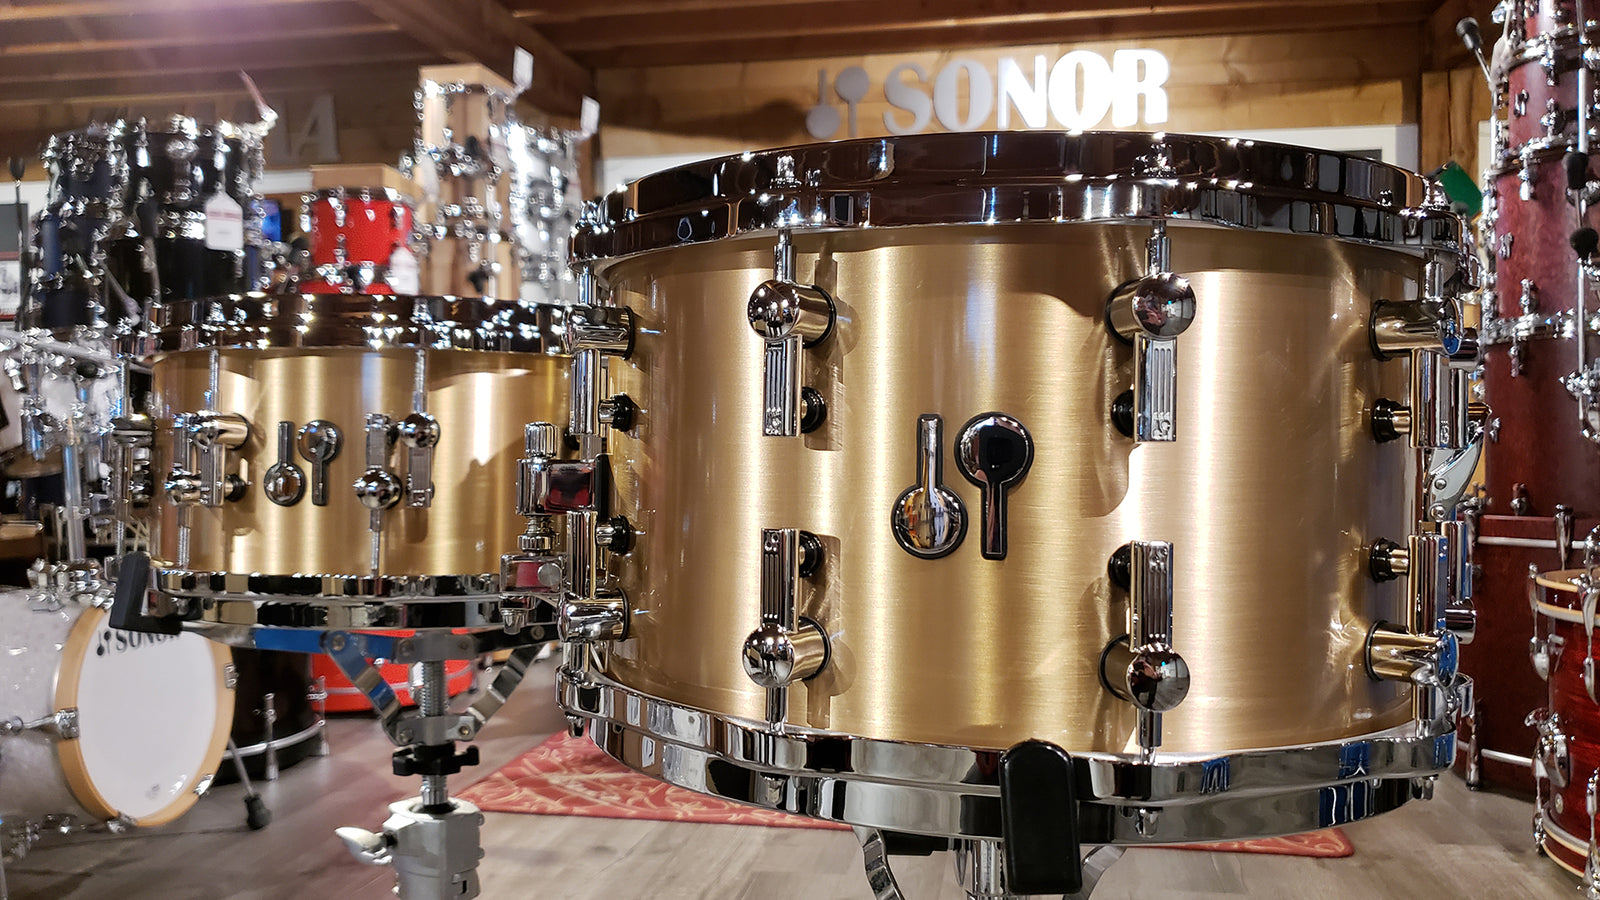 Limited Edition Sonor Cast Bronze Snare Drums at DCP!